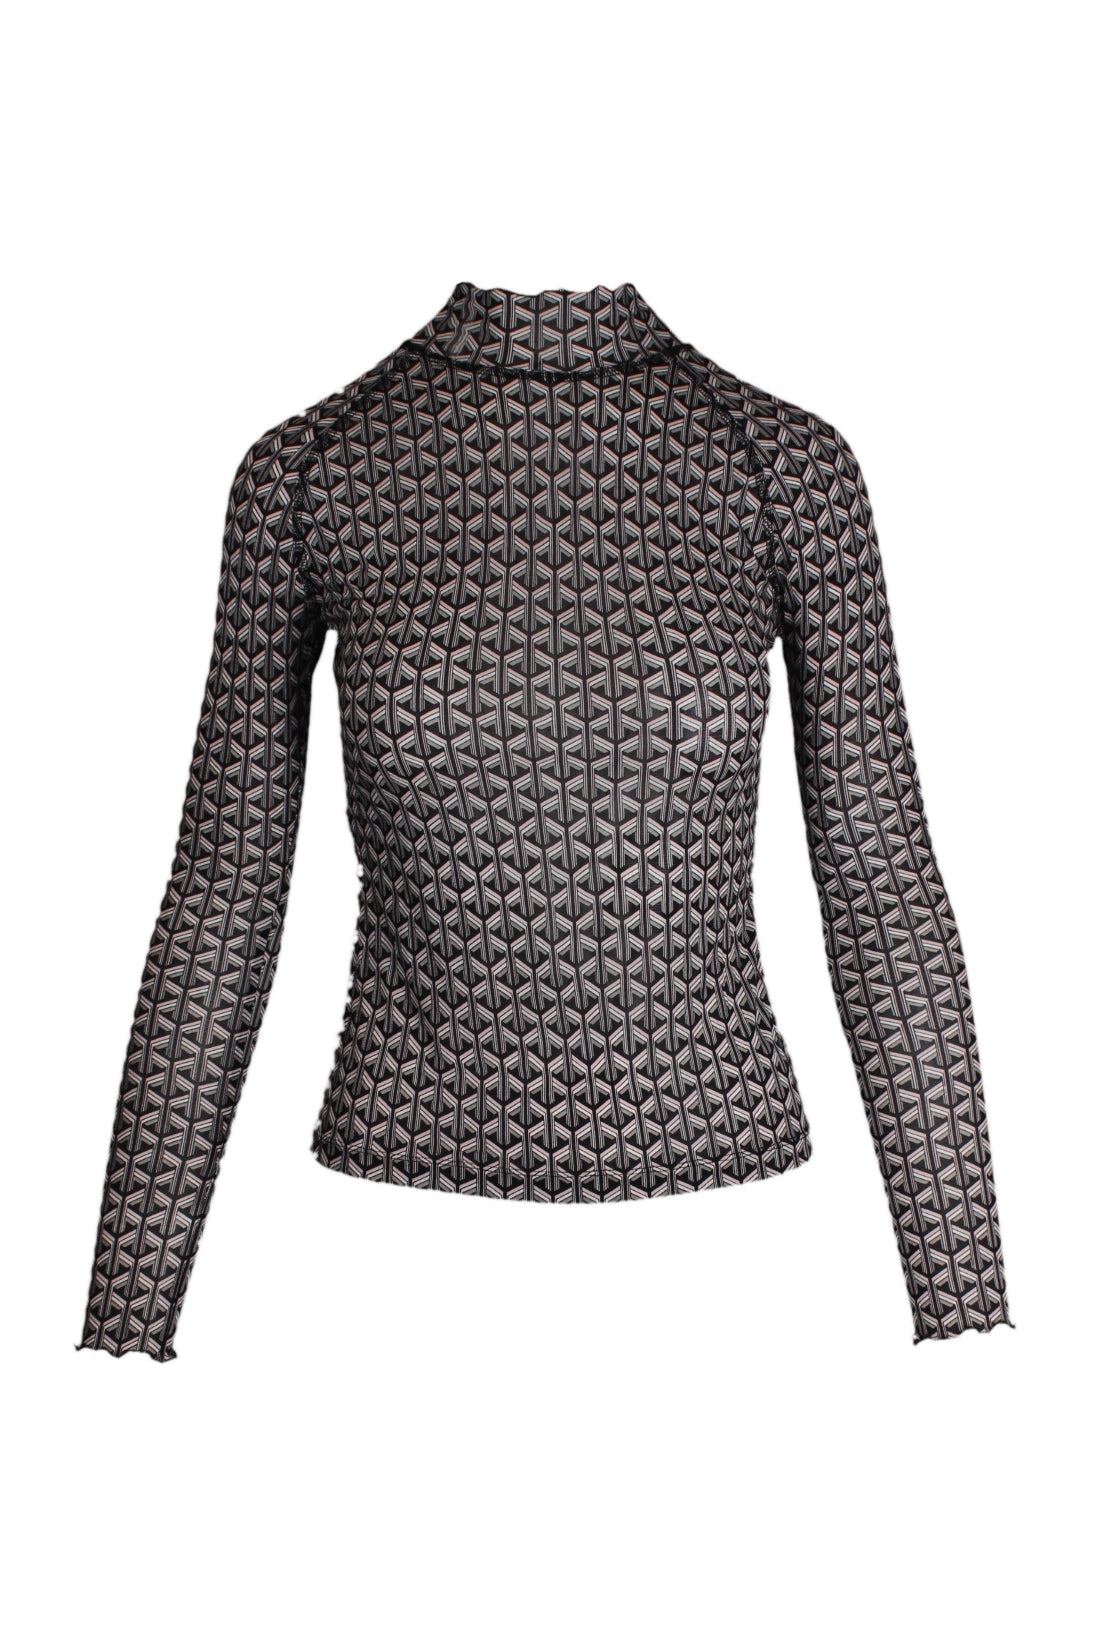 front of diane von furstenberg black and pink long sleeve mesh top. features high neckline, geometrical print throughout, contrast stitching in black, and pull on style. 